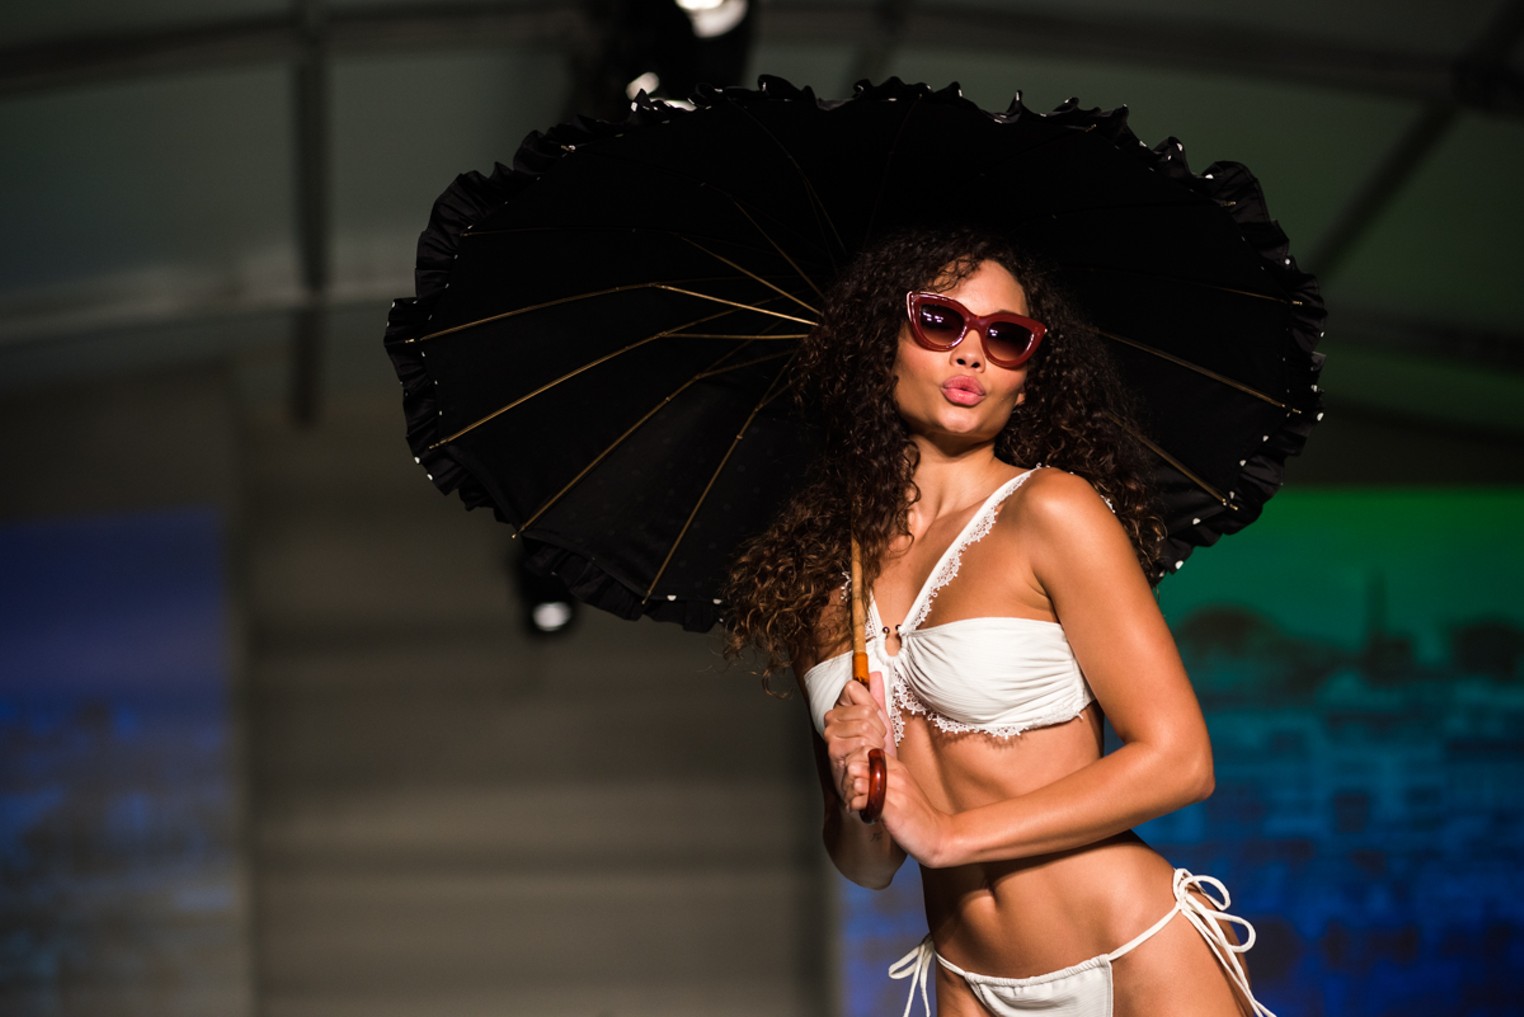 Miami Swim Week 2019 Party and Event Guide